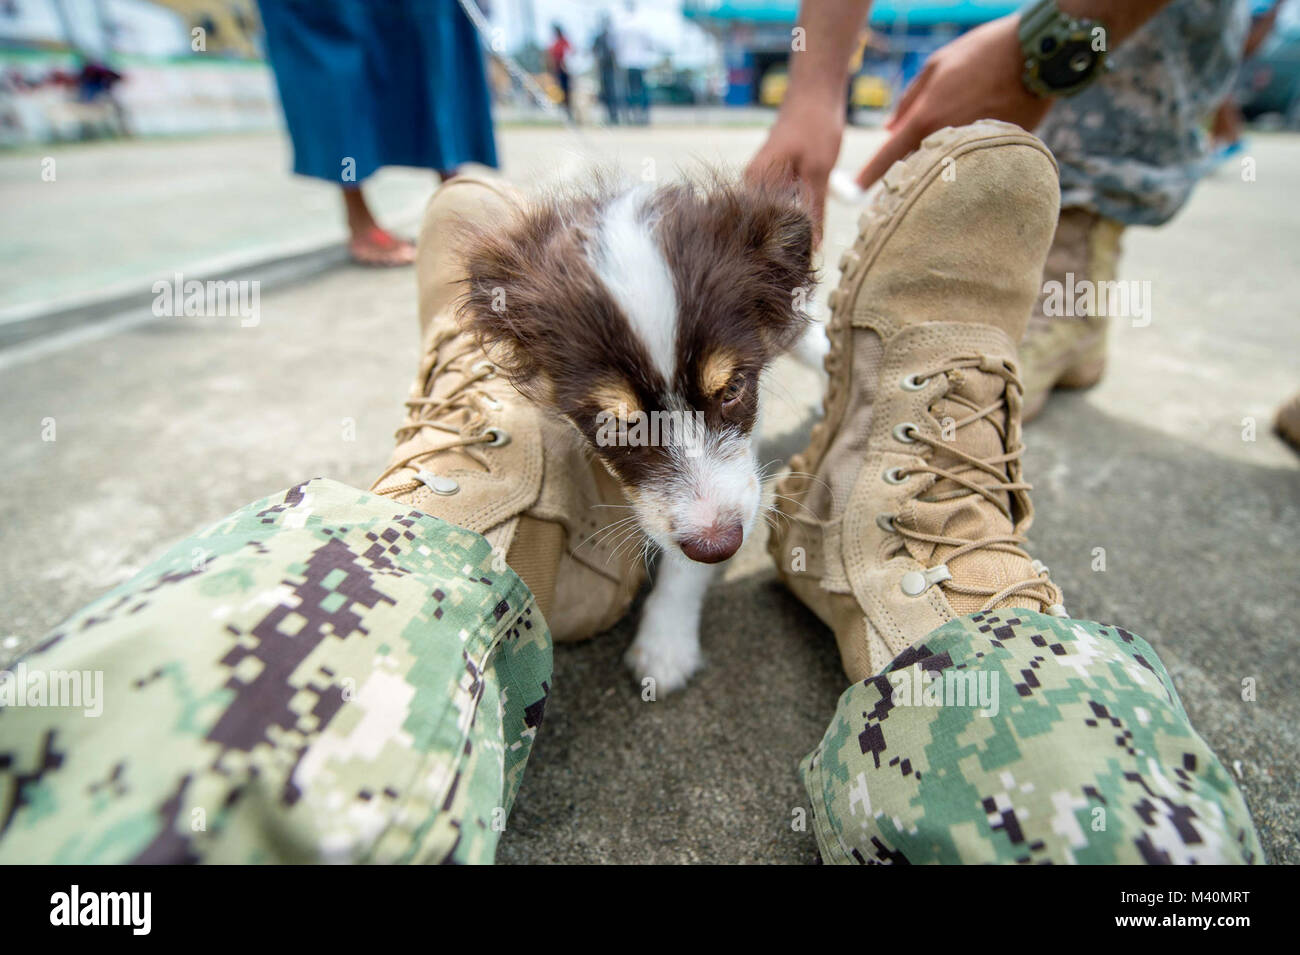 150606-N-XQ474-131 COLÓN, Panama (June 6, 2015) Mass Communication Specialist 3rd Class Andrew Schneider, a native of Staten Island, N.Y., assigned Navy Public Affairs Support Element East Norfolk, Va., plays with a puppy at a veterinary site during Continuing Promise 2015. Continuing Promise is a U.S. Southern Command-sponsored and U.S. Naval Forces Southern Command/U.S. 4th Fleet-conducted deployment to conduct civil-military operations including humanitarian-civil assistance, subject matter expert exchanges, medical, dental, veterinary and engineering support and disaster response to partne Stock Photo